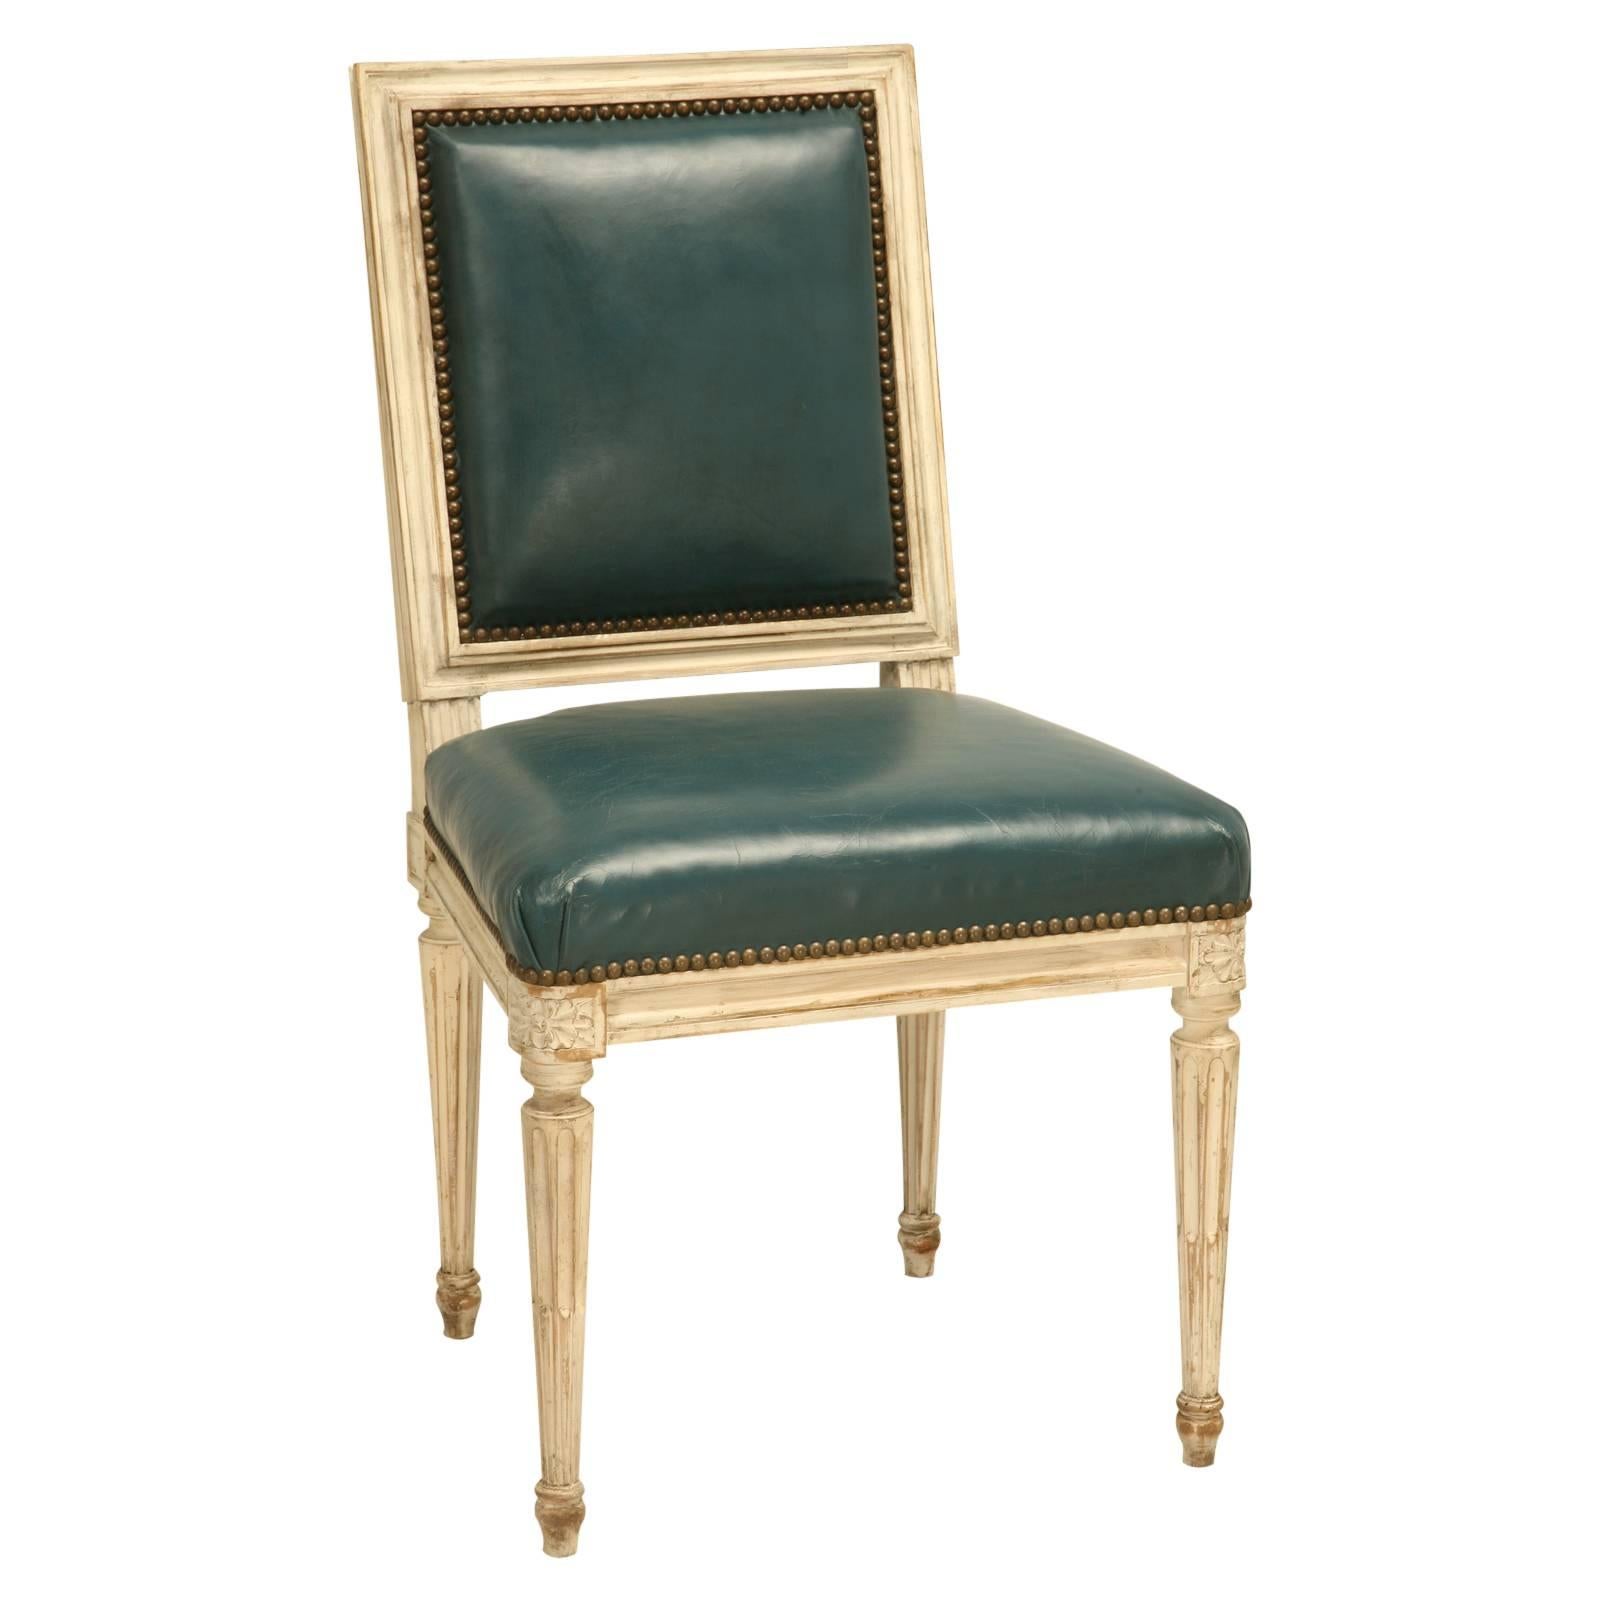 French Louis XVI Style Side Chairs, Handmade in France, Choice of Finishes